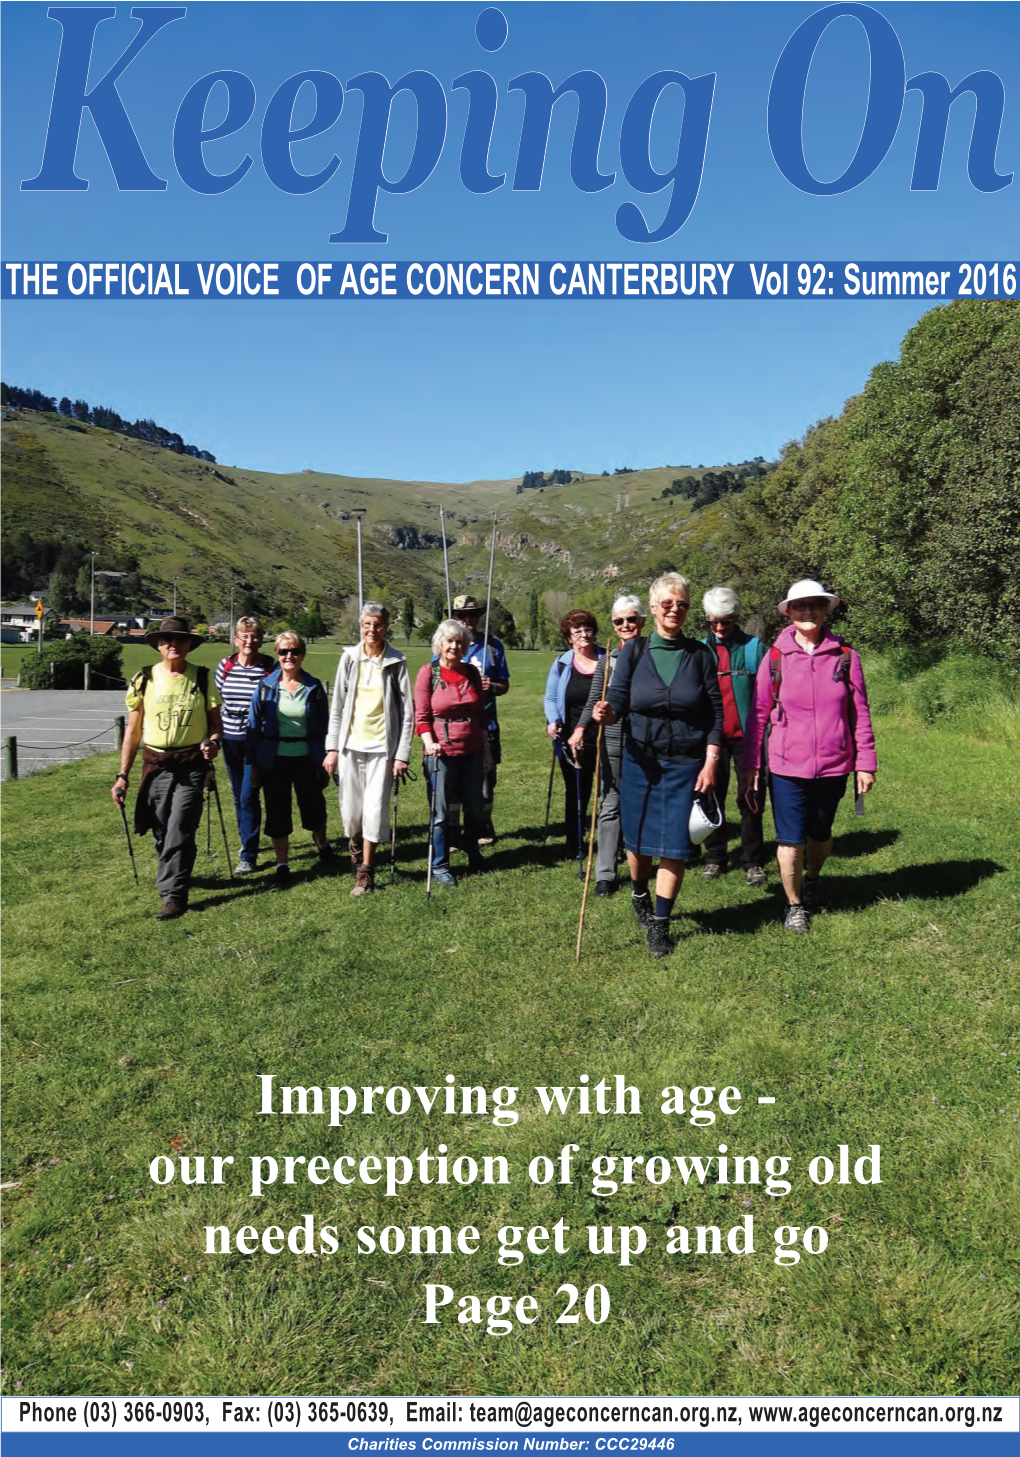 Our Preception of Growing Old Needs Some Get up and Go Page 20